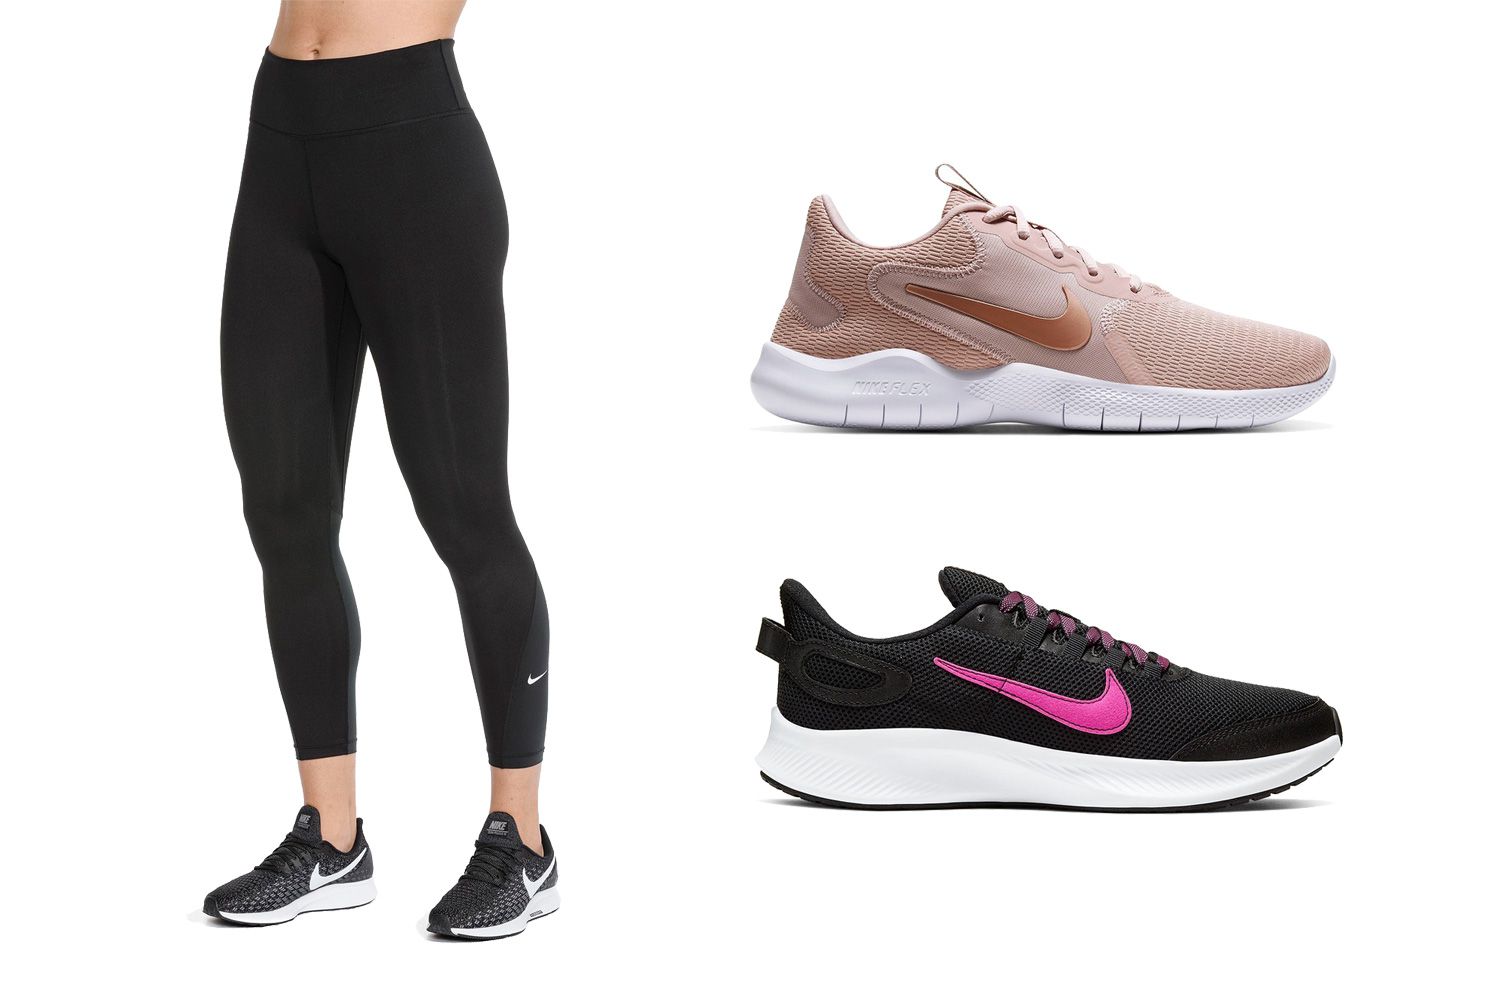 Nordstrom Rack Nike Sale: Up to 45% Off 